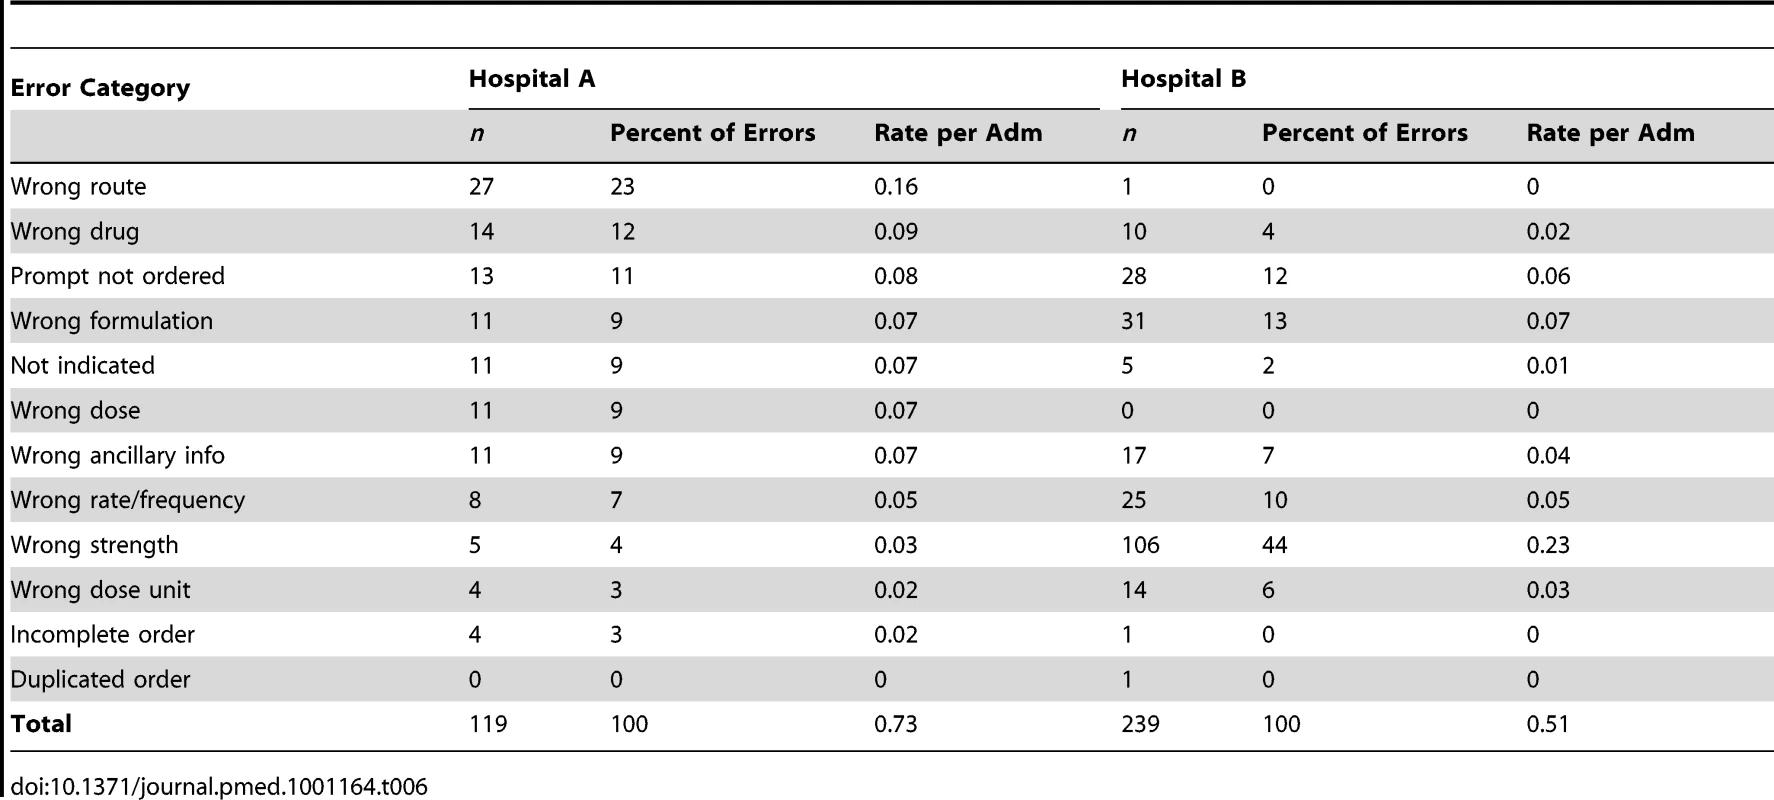 The manifestation of system-related prescribing error rates by type and hospital.